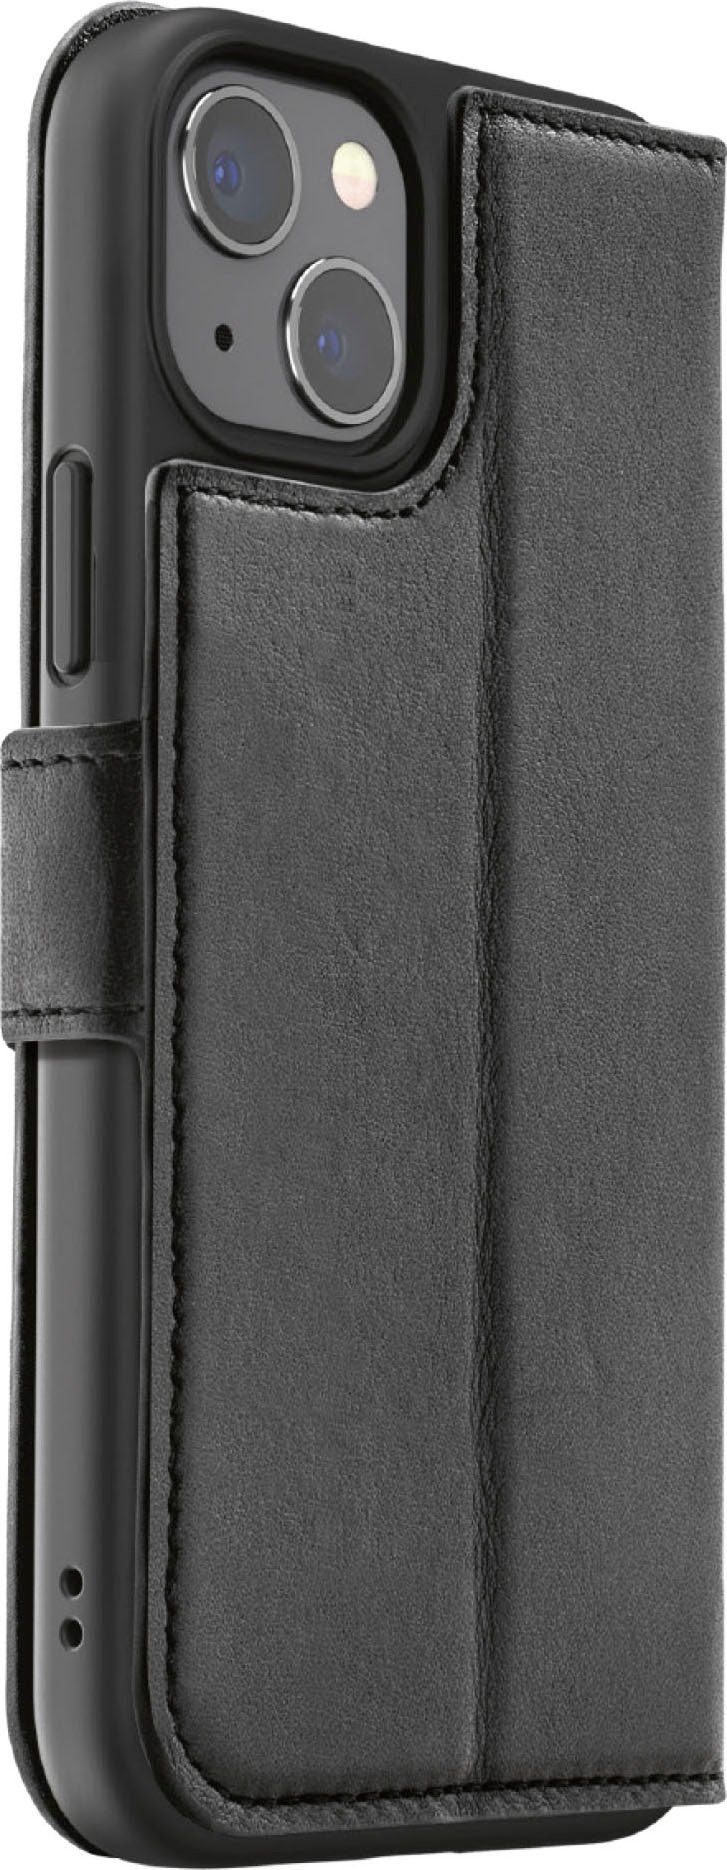 adidas Wallet Leather Originals FLAVR Case Backcover Recycled